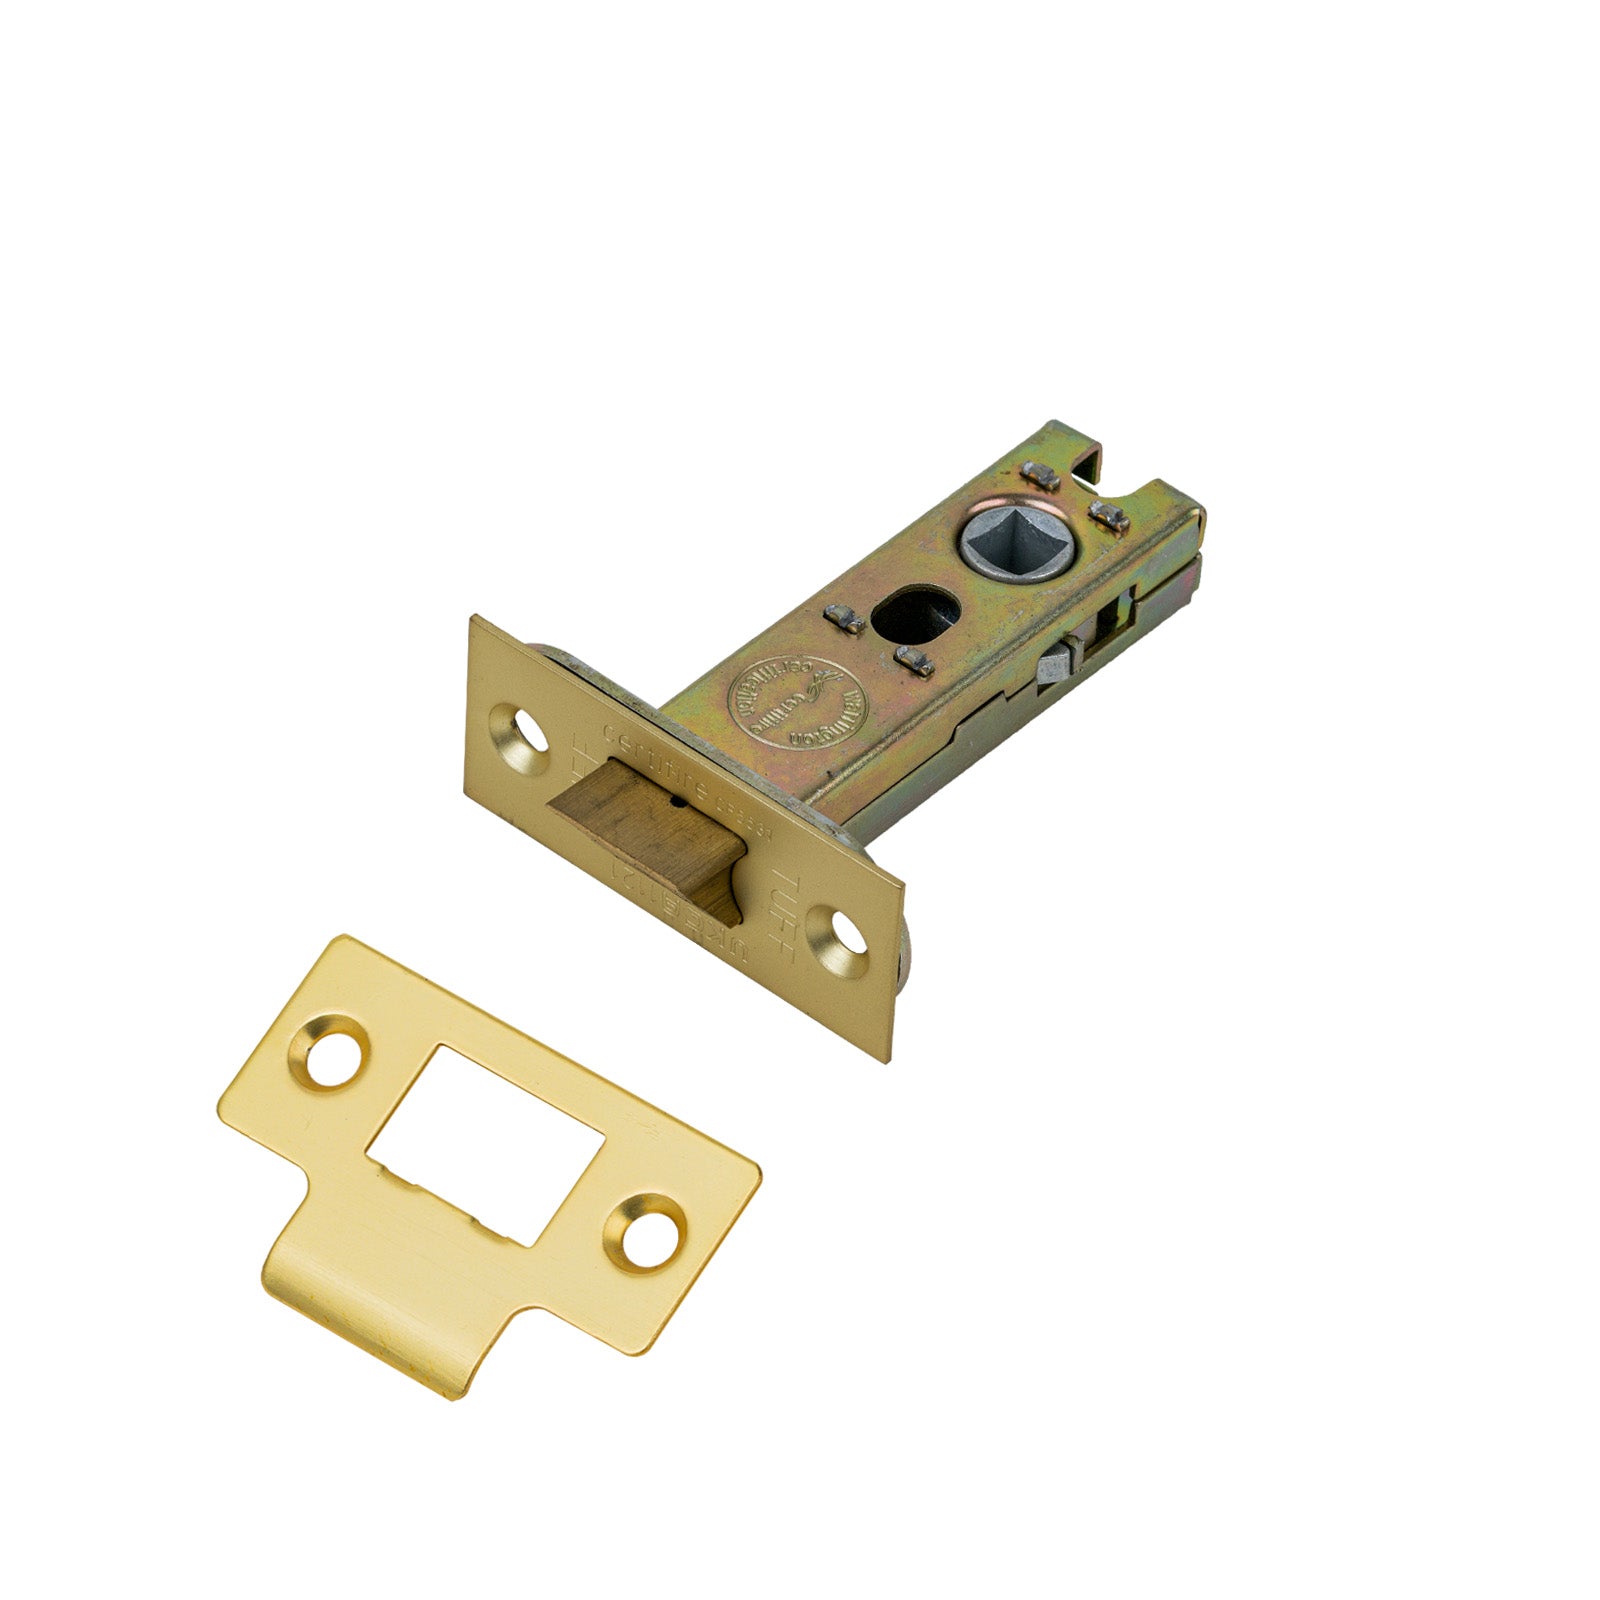 SHOW Heavy Duty Tubular Latch - 3 Inch with Satin Brass finished forend and striker plate